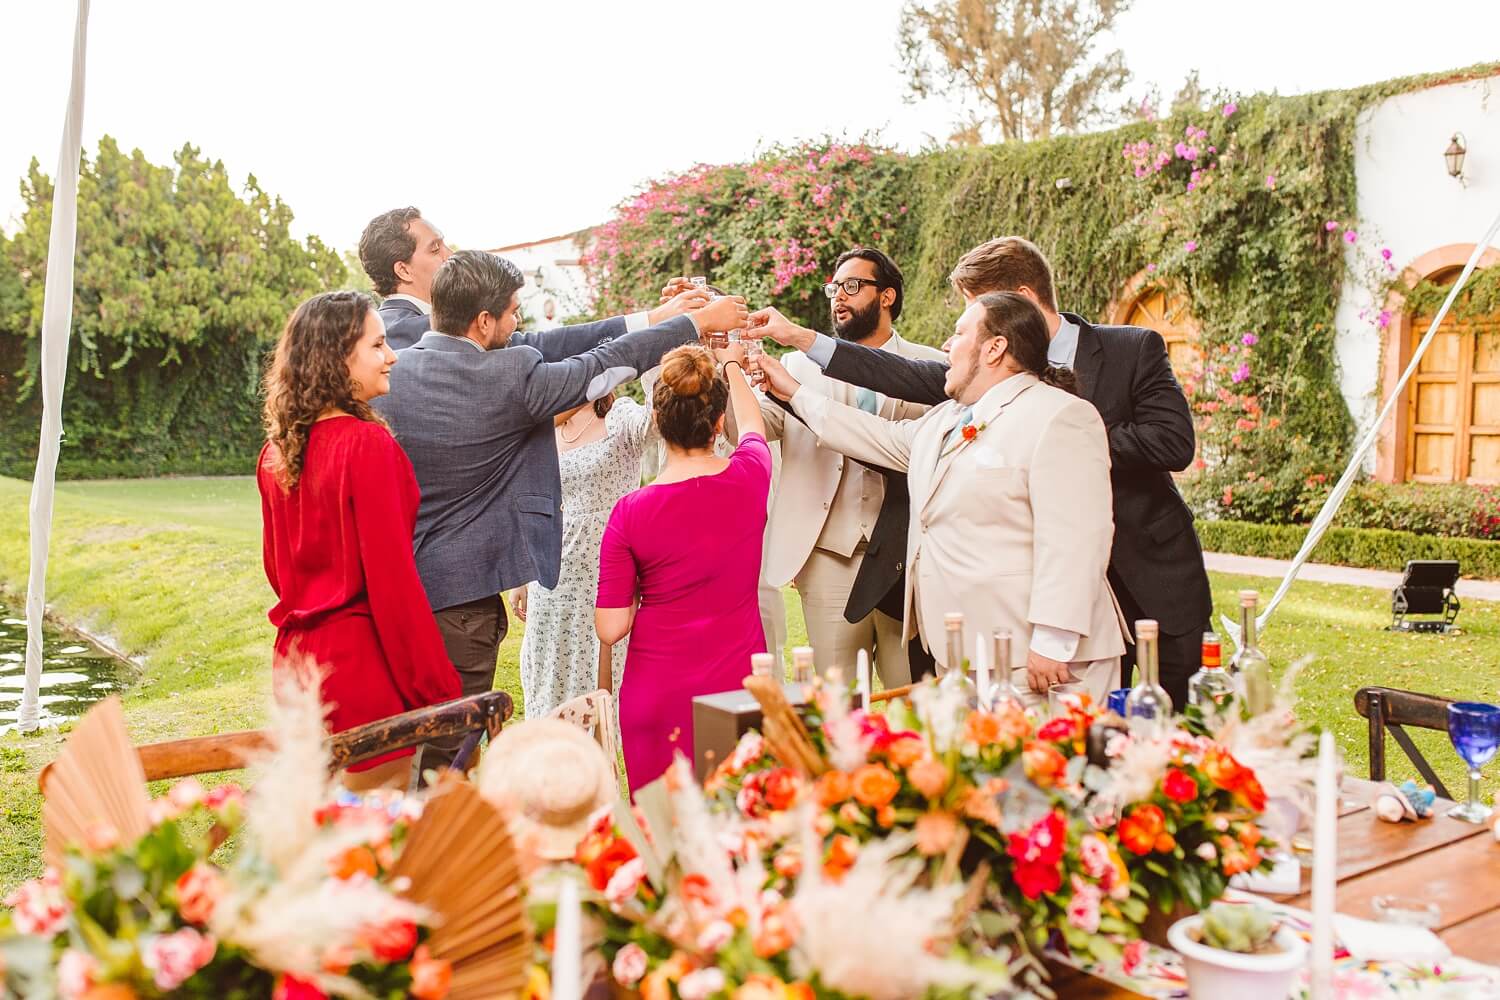 Wedding guests toasting during wedding reception in Mexico | Brooke Michelle Photo